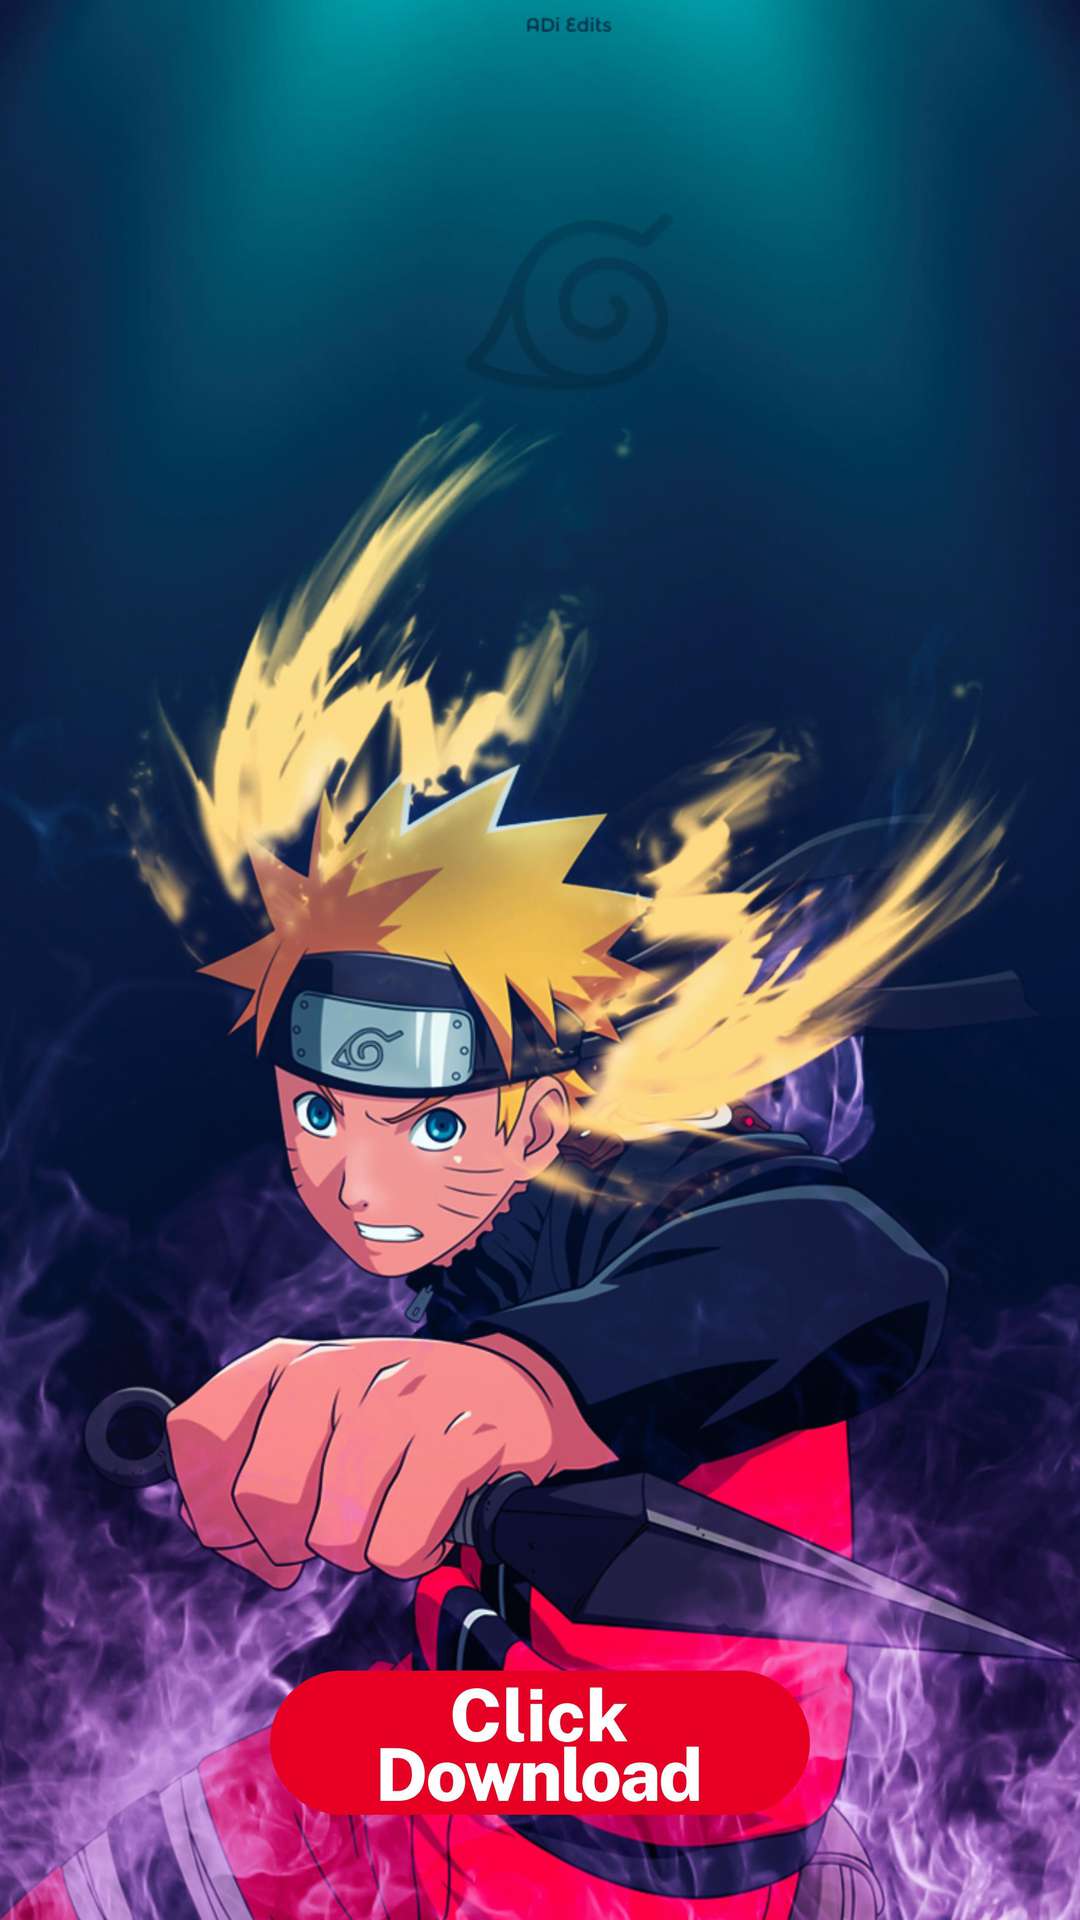 13+ Konoha Wallpapers for iPhone and Android by Kristen Livingston